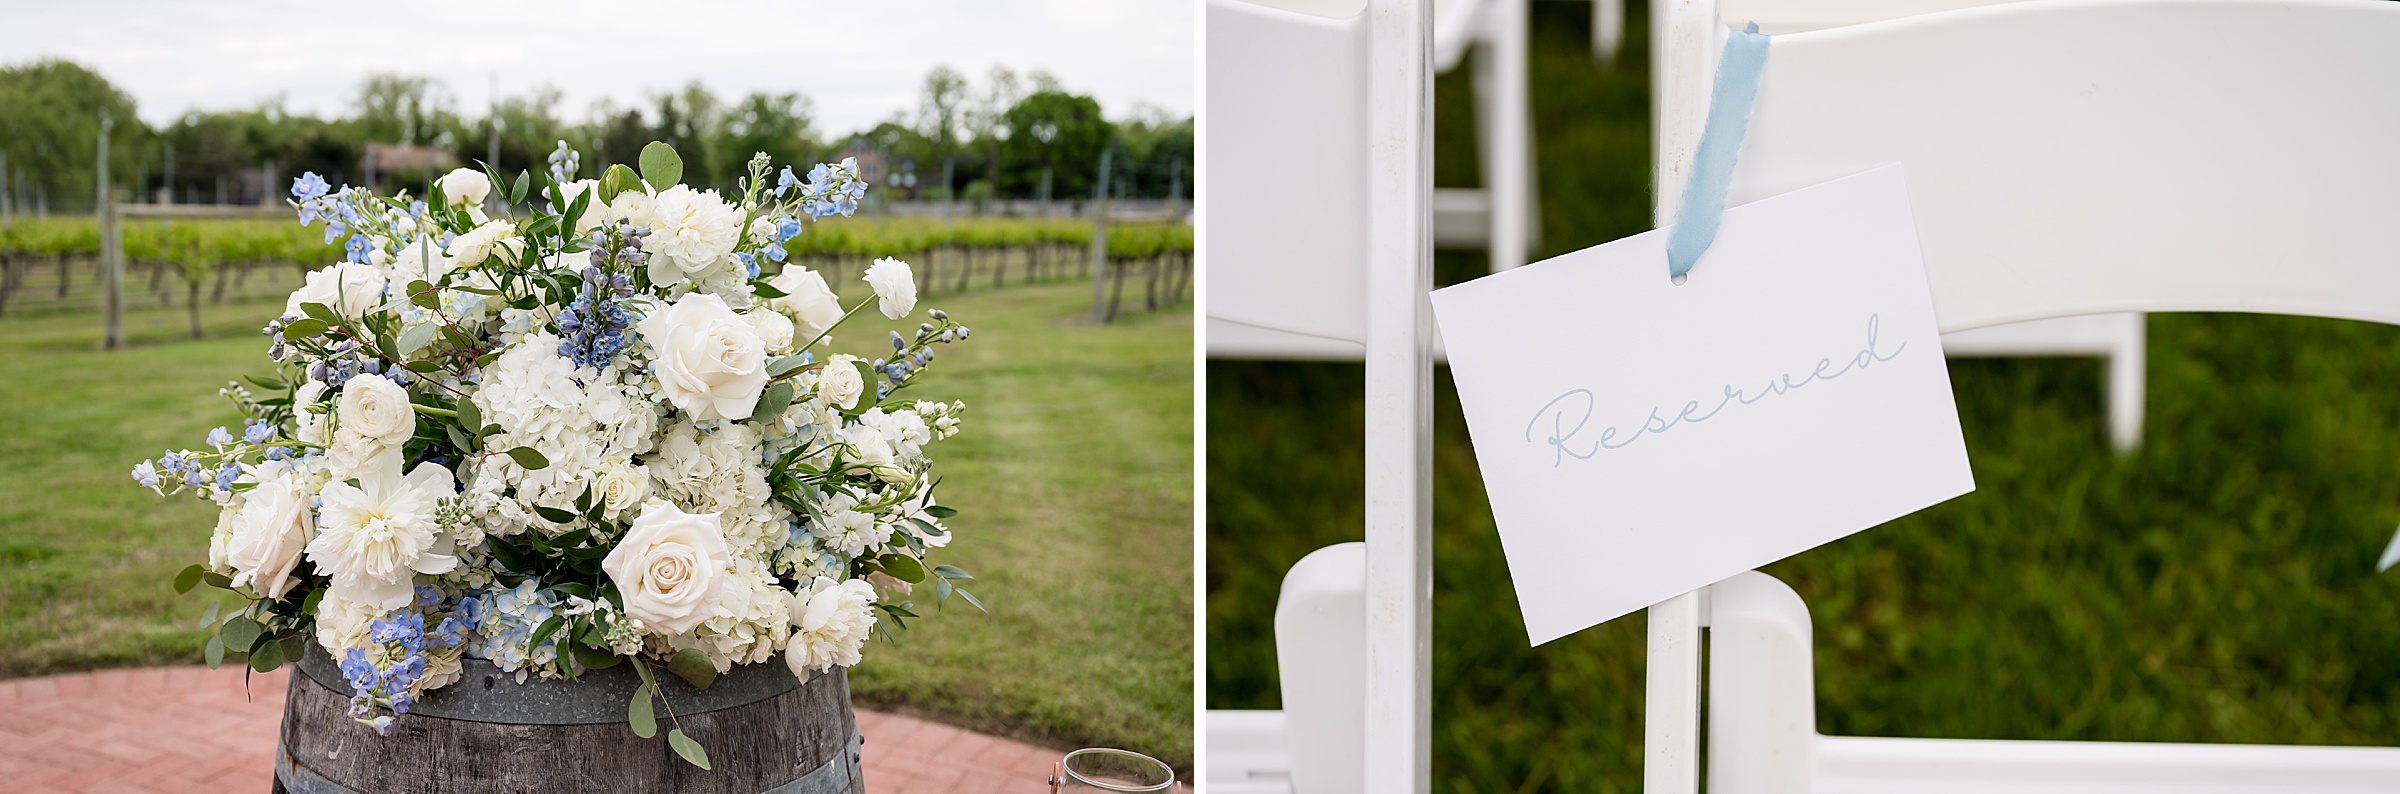 A wedding arrangement with white and blue flowers on a barrel. Next to it, a white chair with a reserved sign. A grassy area and trees in the background.